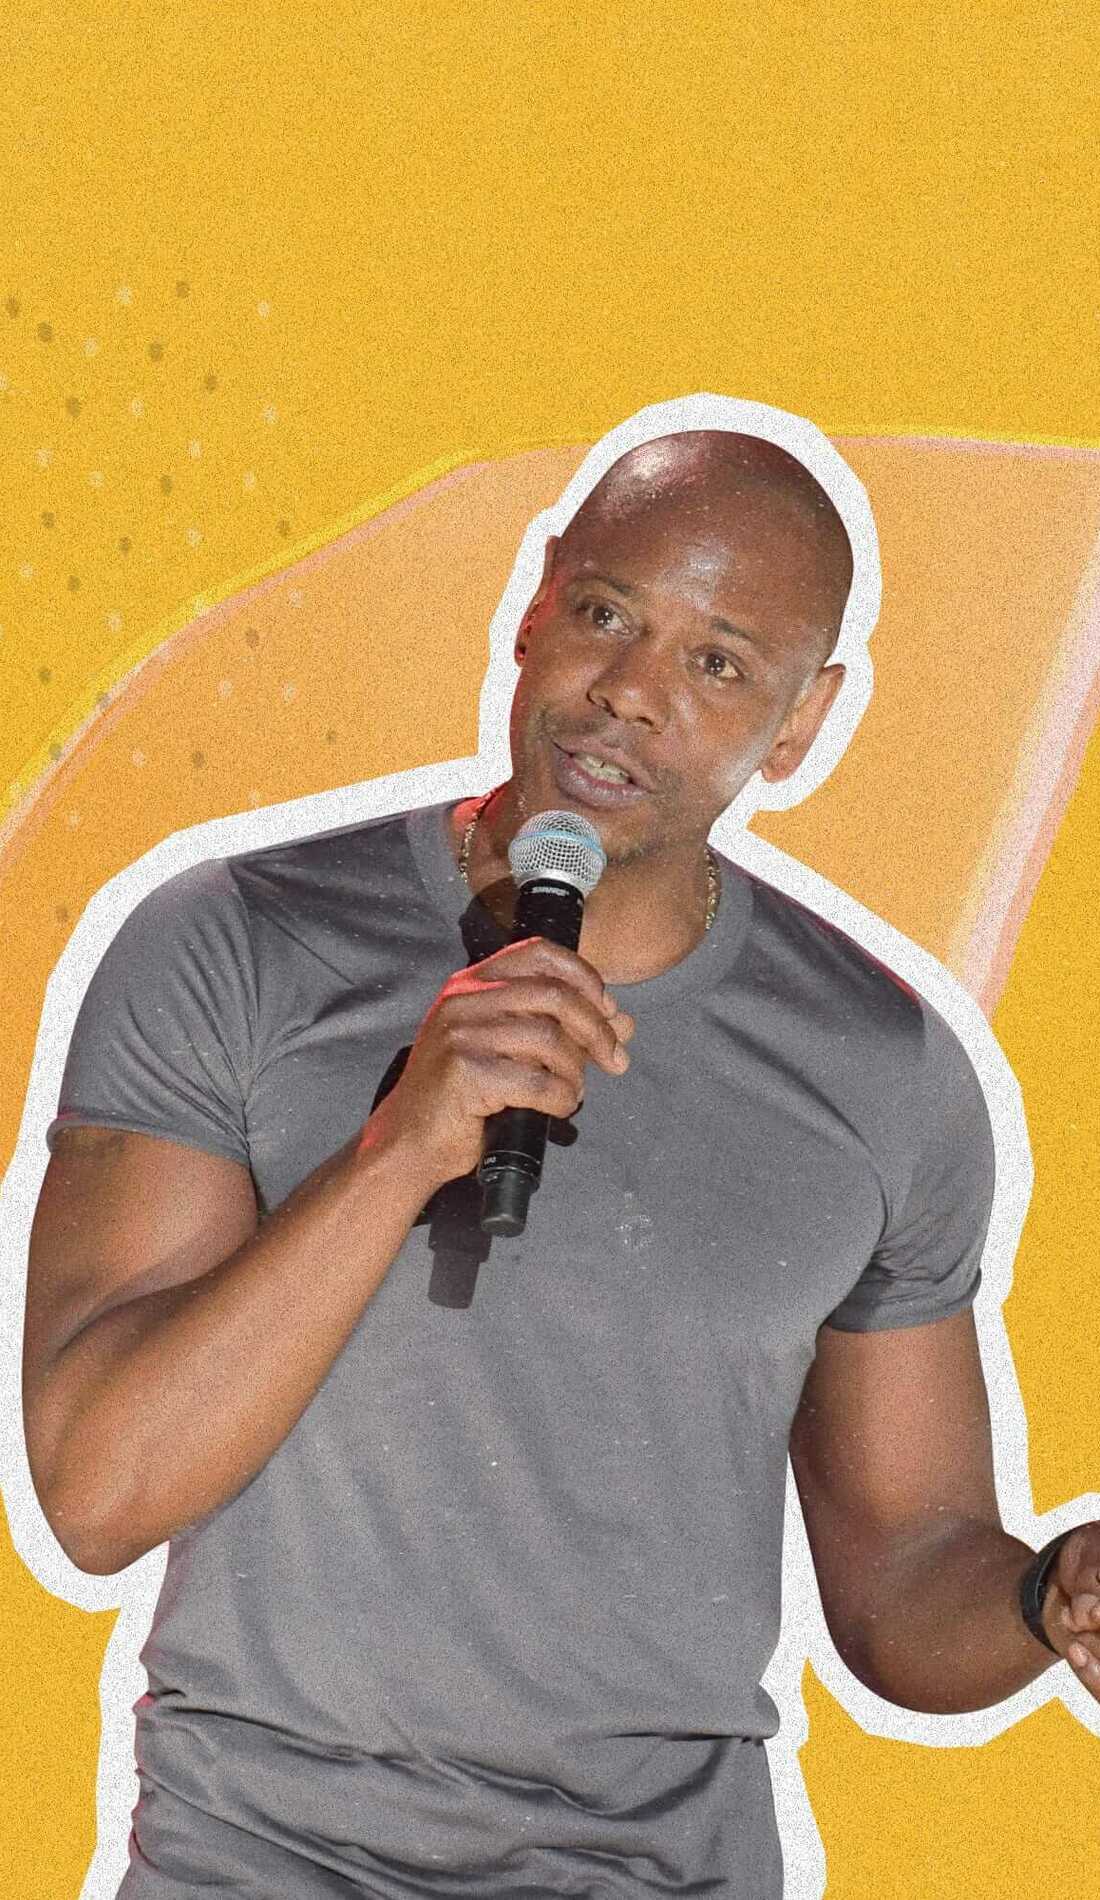 A Dave Chappelle live event